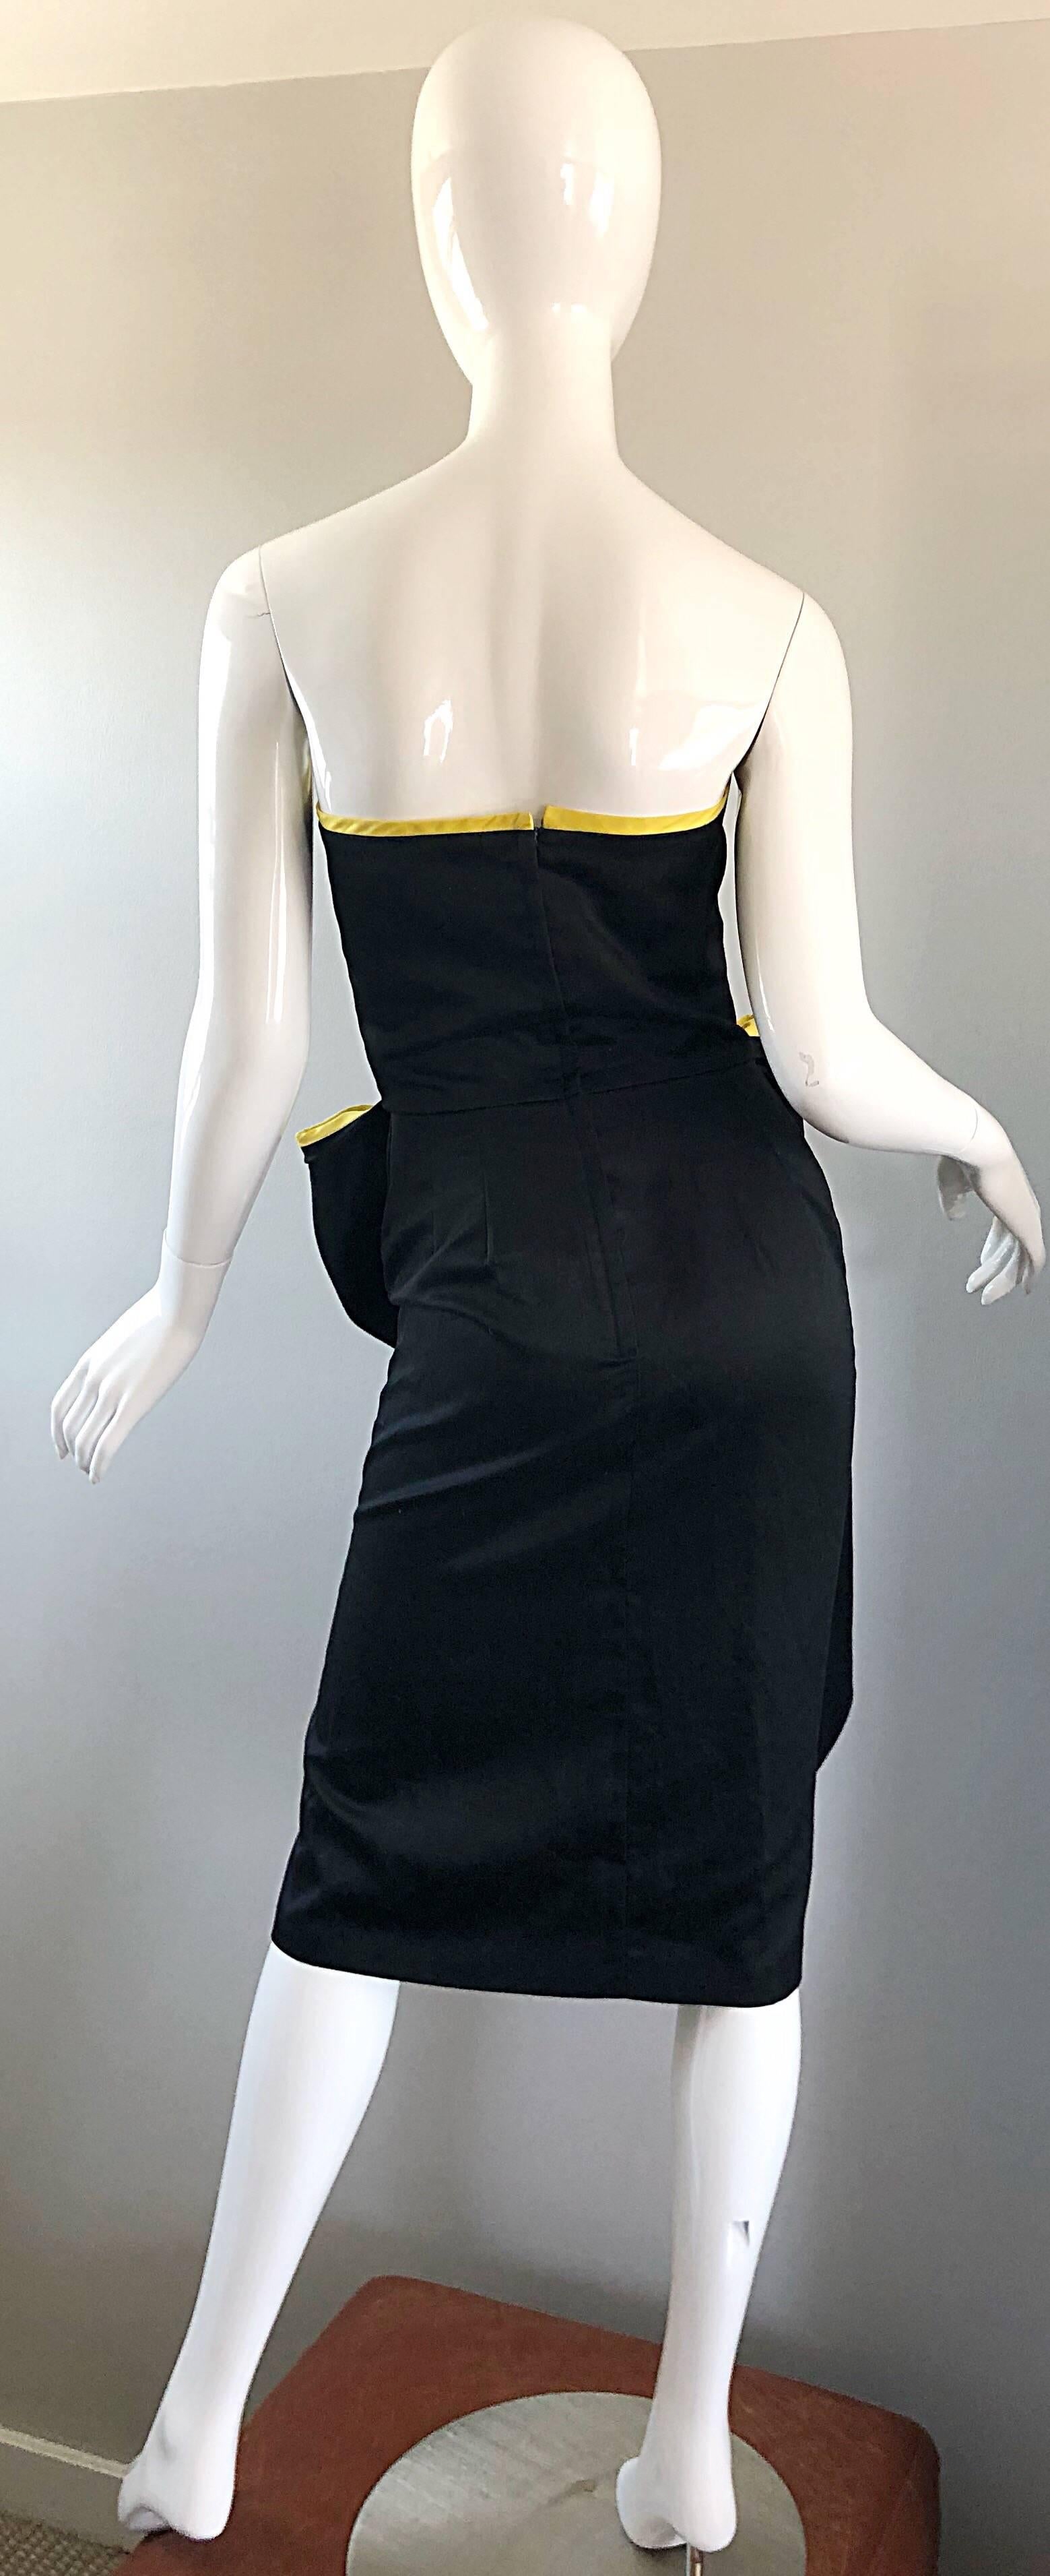 Vintage Victor Costa Black + Yellow Avant Garde 1980s Strapless Cotton Dress In Excellent Condition For Sale In San Diego, CA